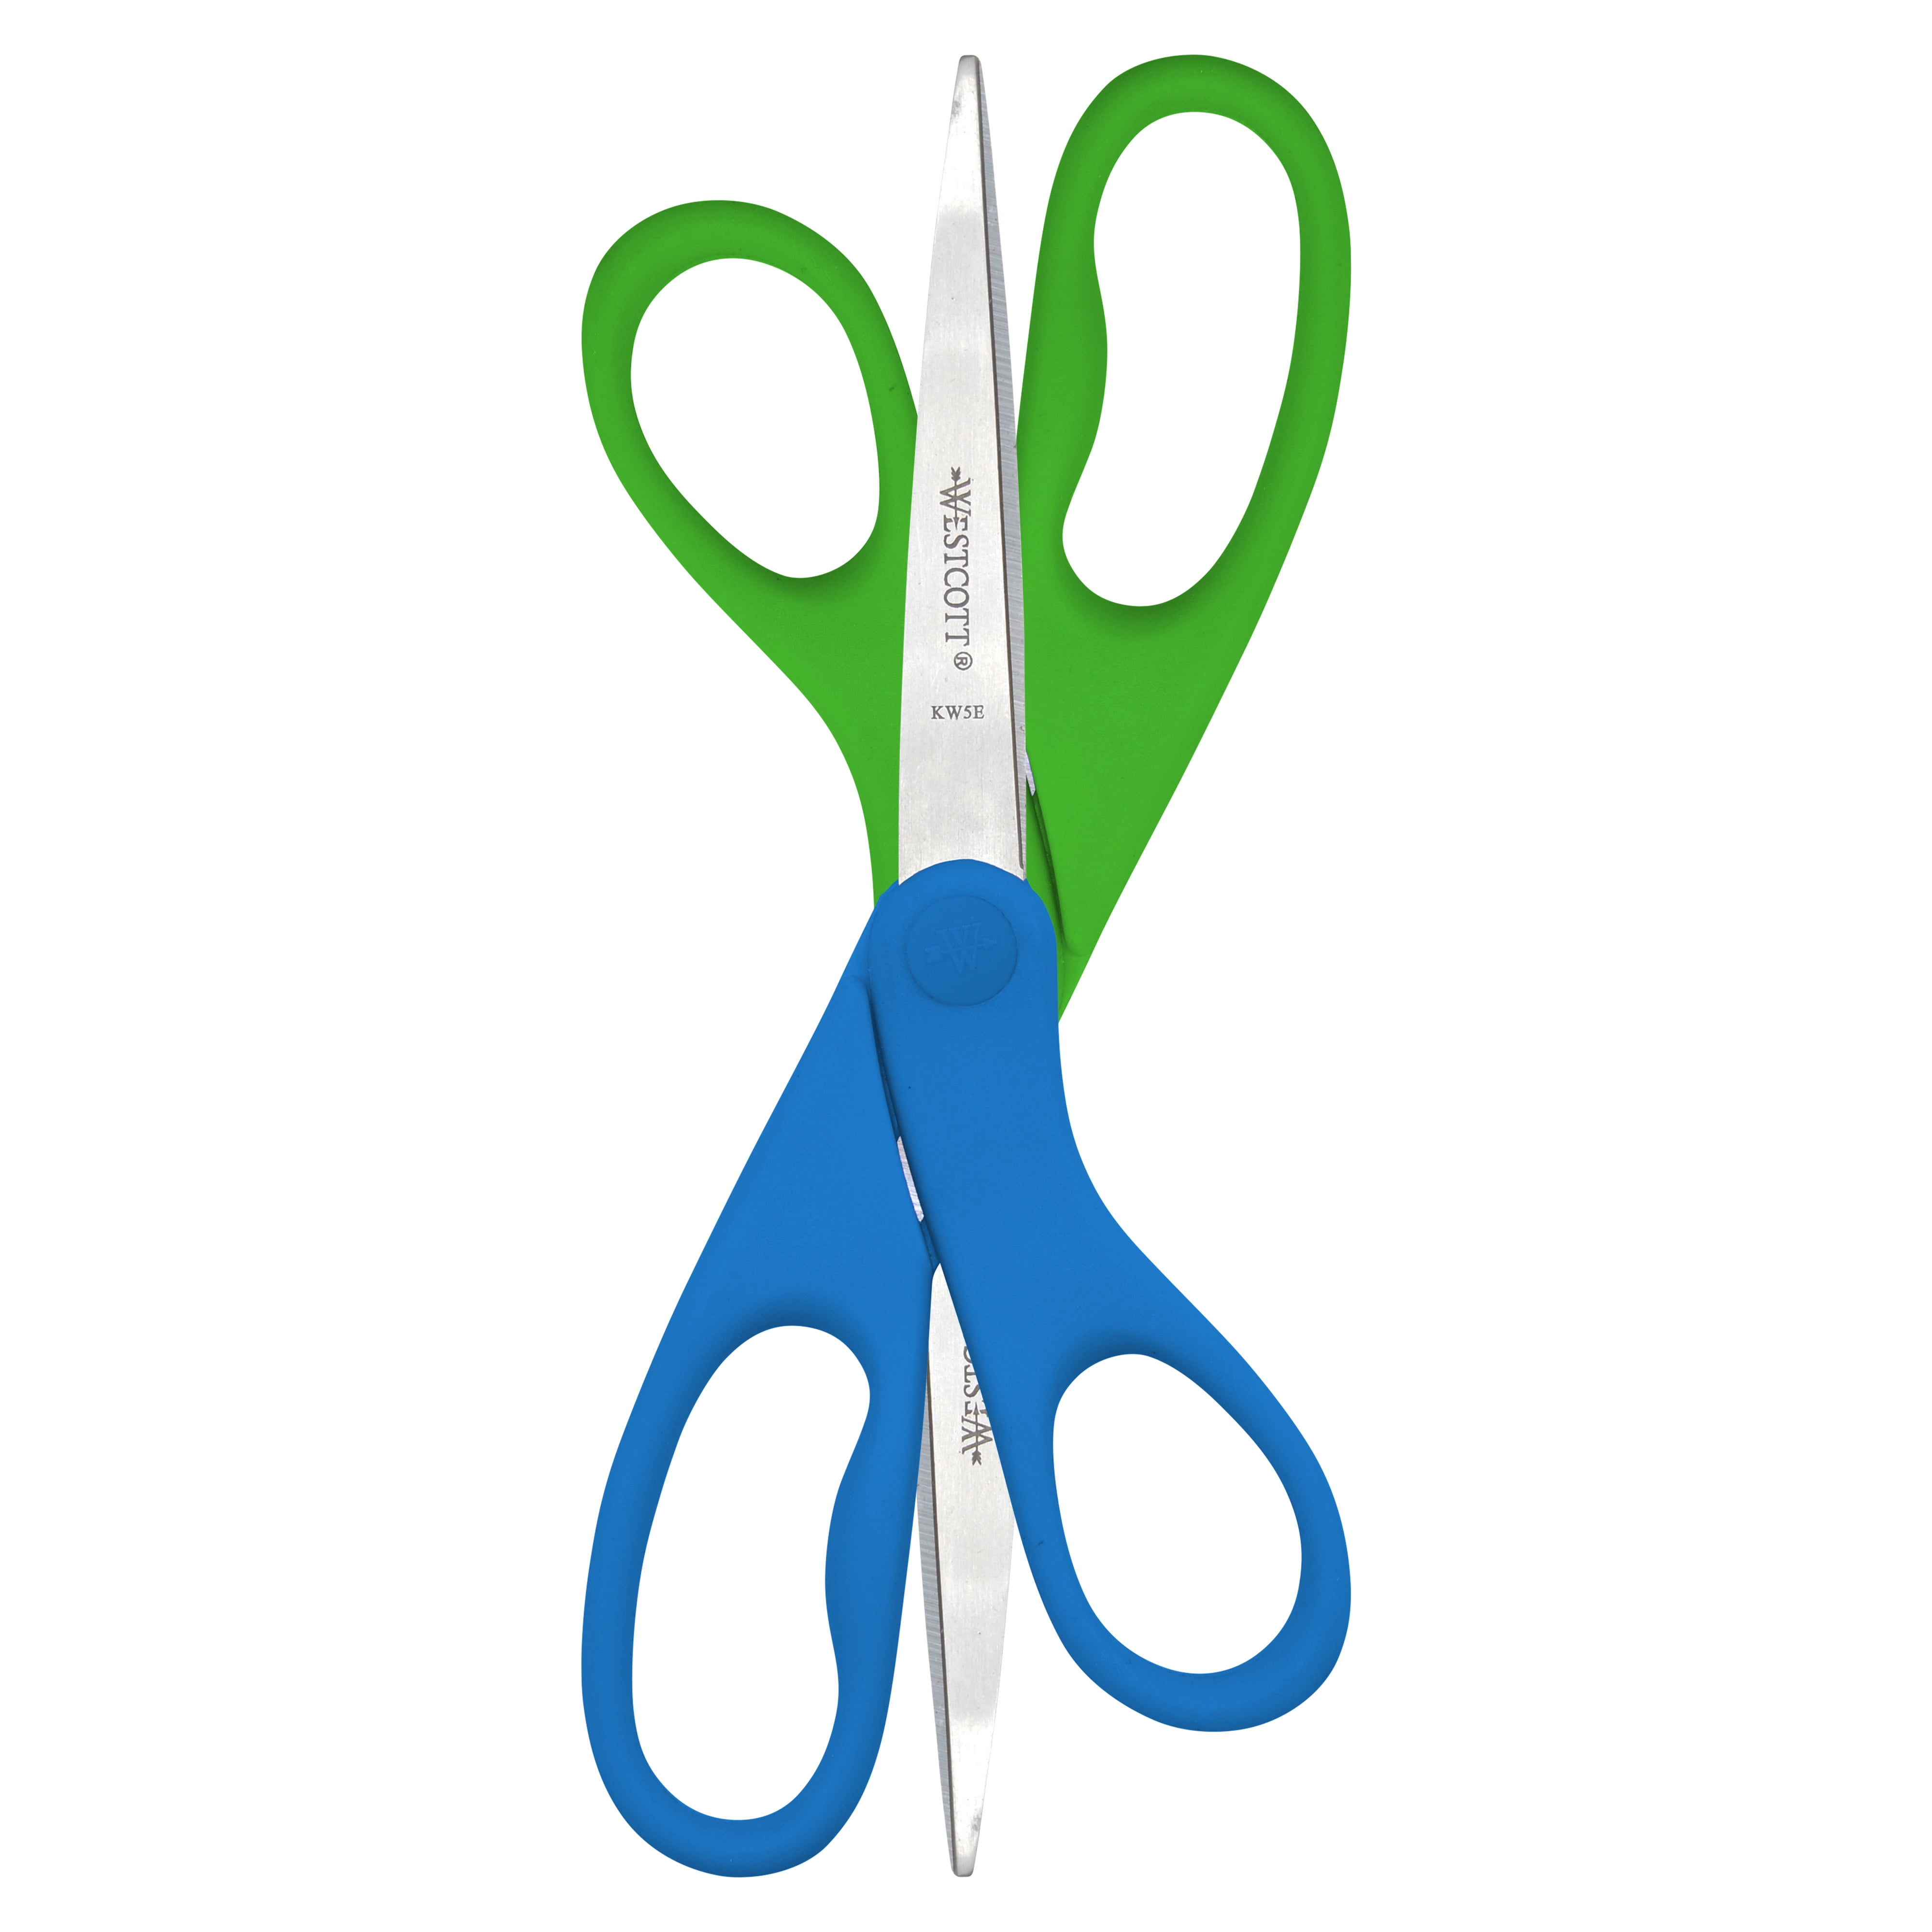 Westcott 7 Student Scissors With Anti-microbial Protection, Assorted  Colors (14231)